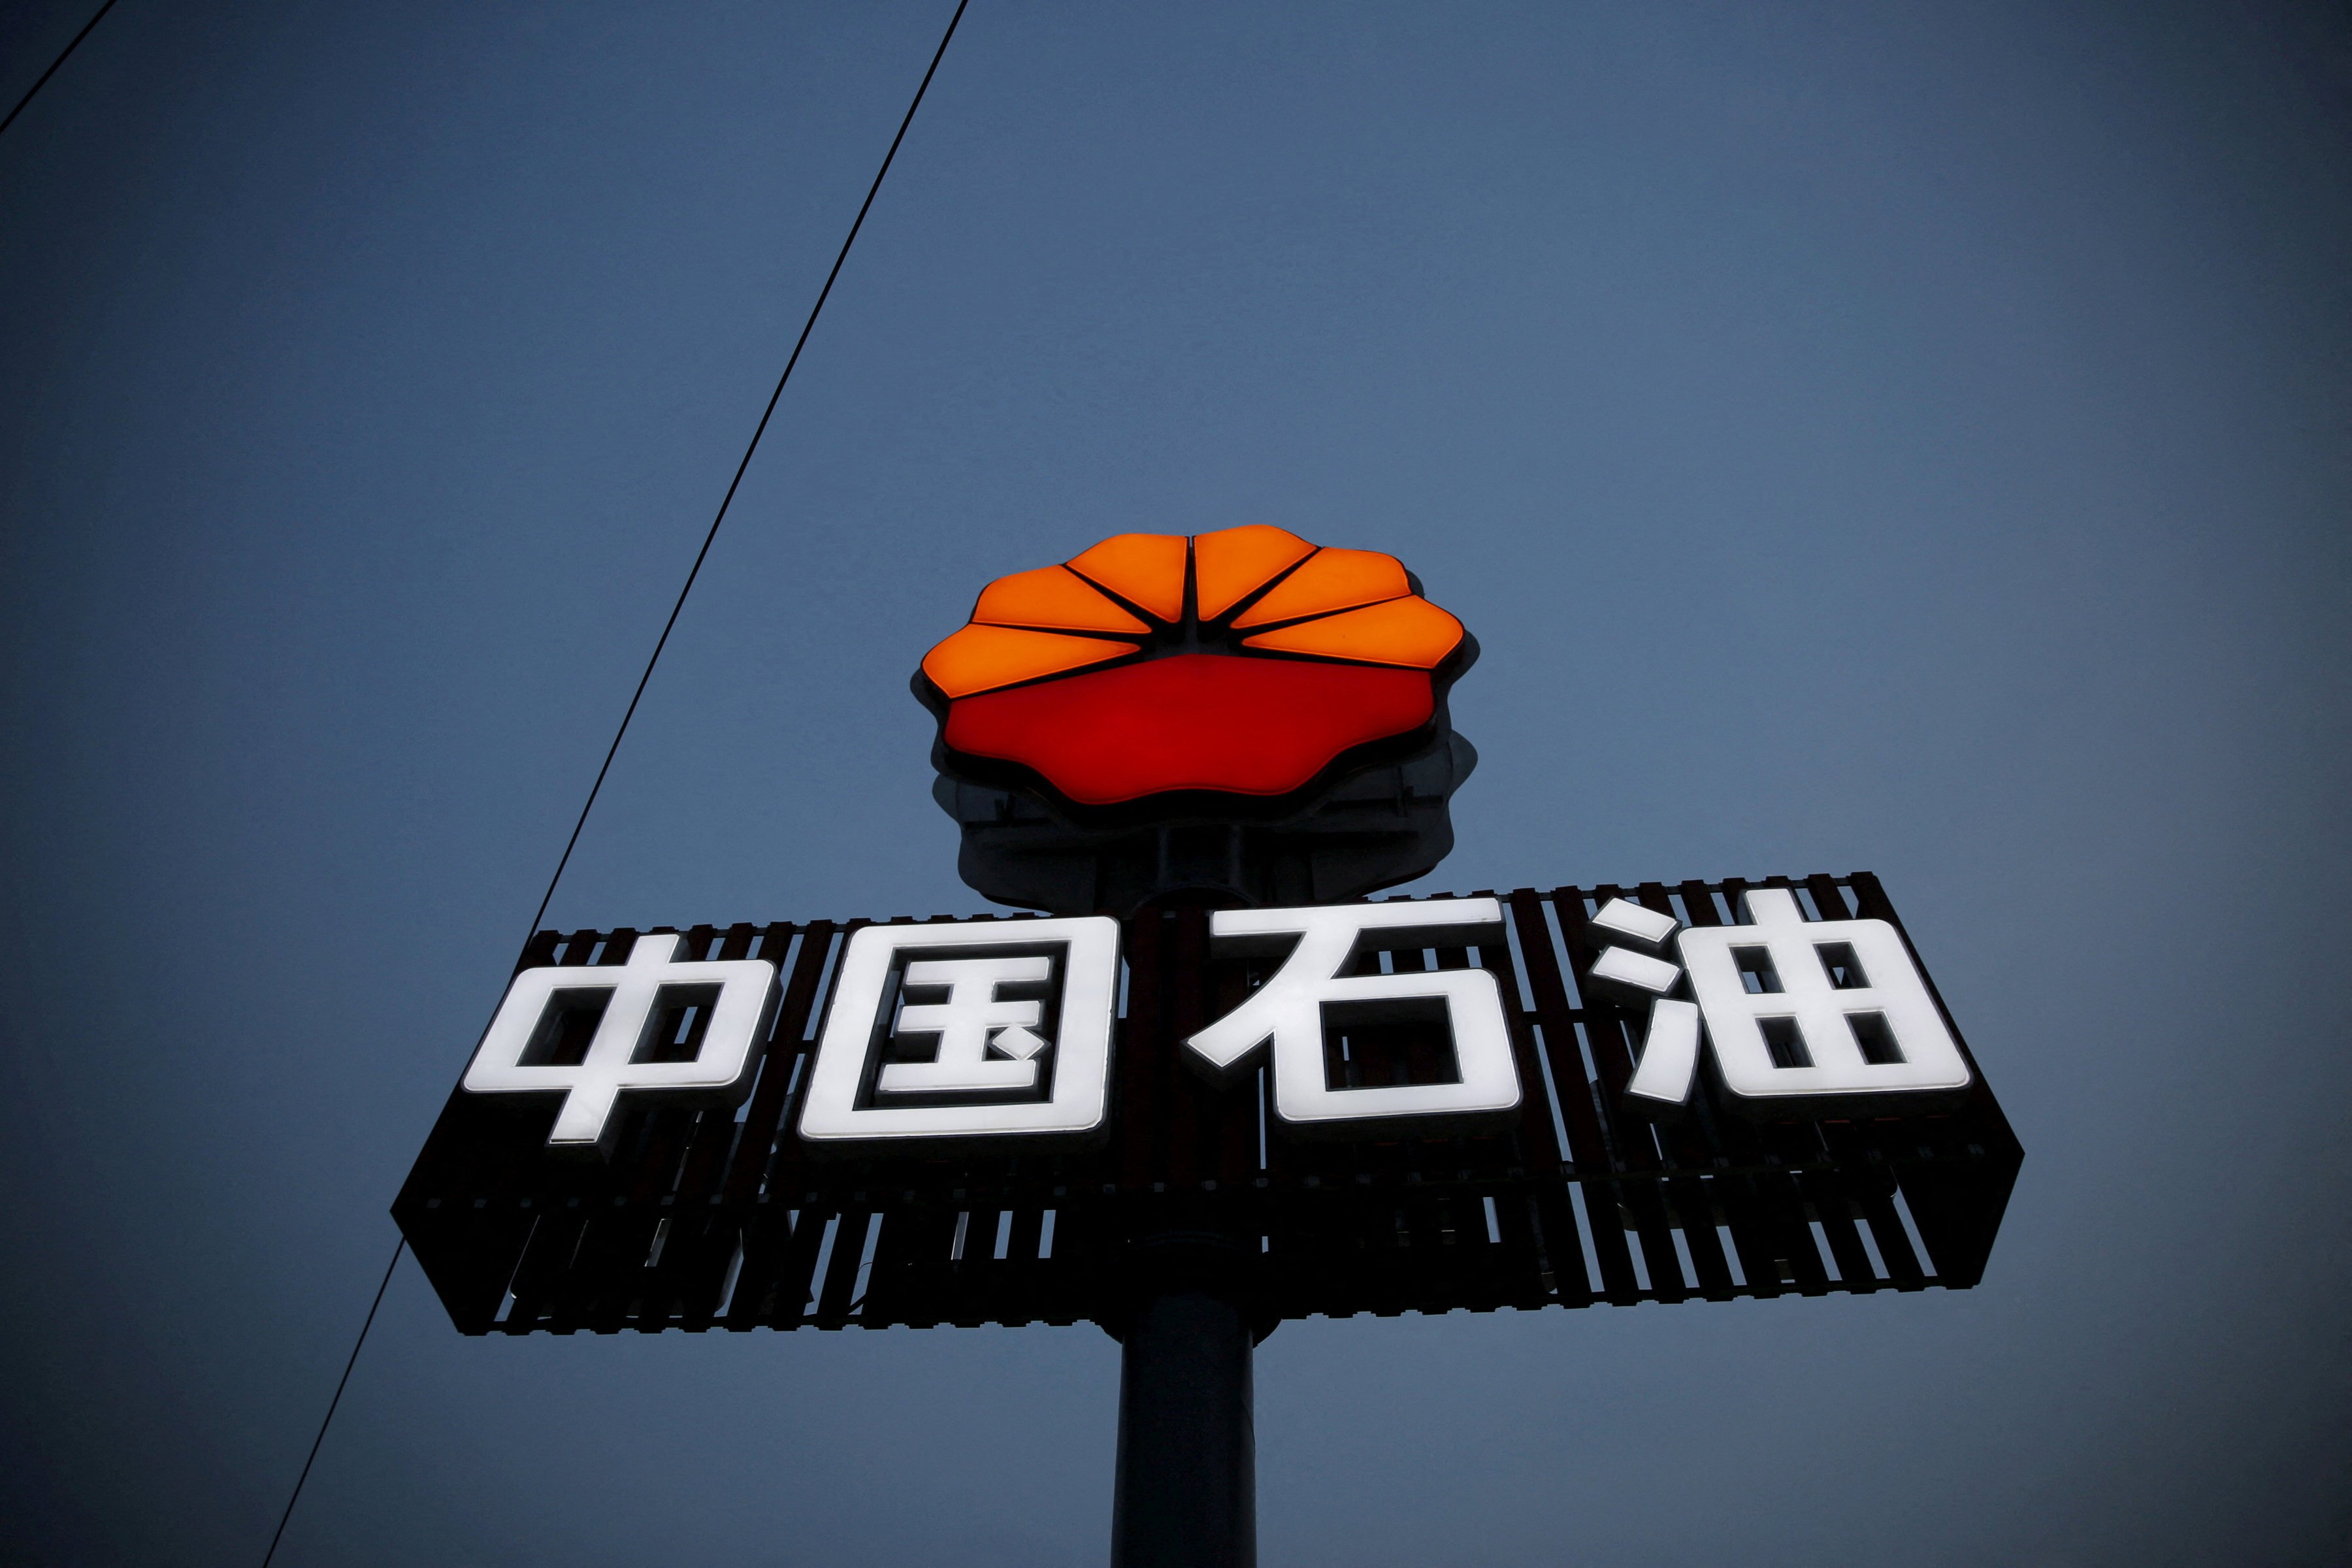 PetroChina’s logo is seen at a petrol station in Beijing. China’s largest oil and gas producer saw its first-half net profit jump due to higher oil prices. Photo: Reuters